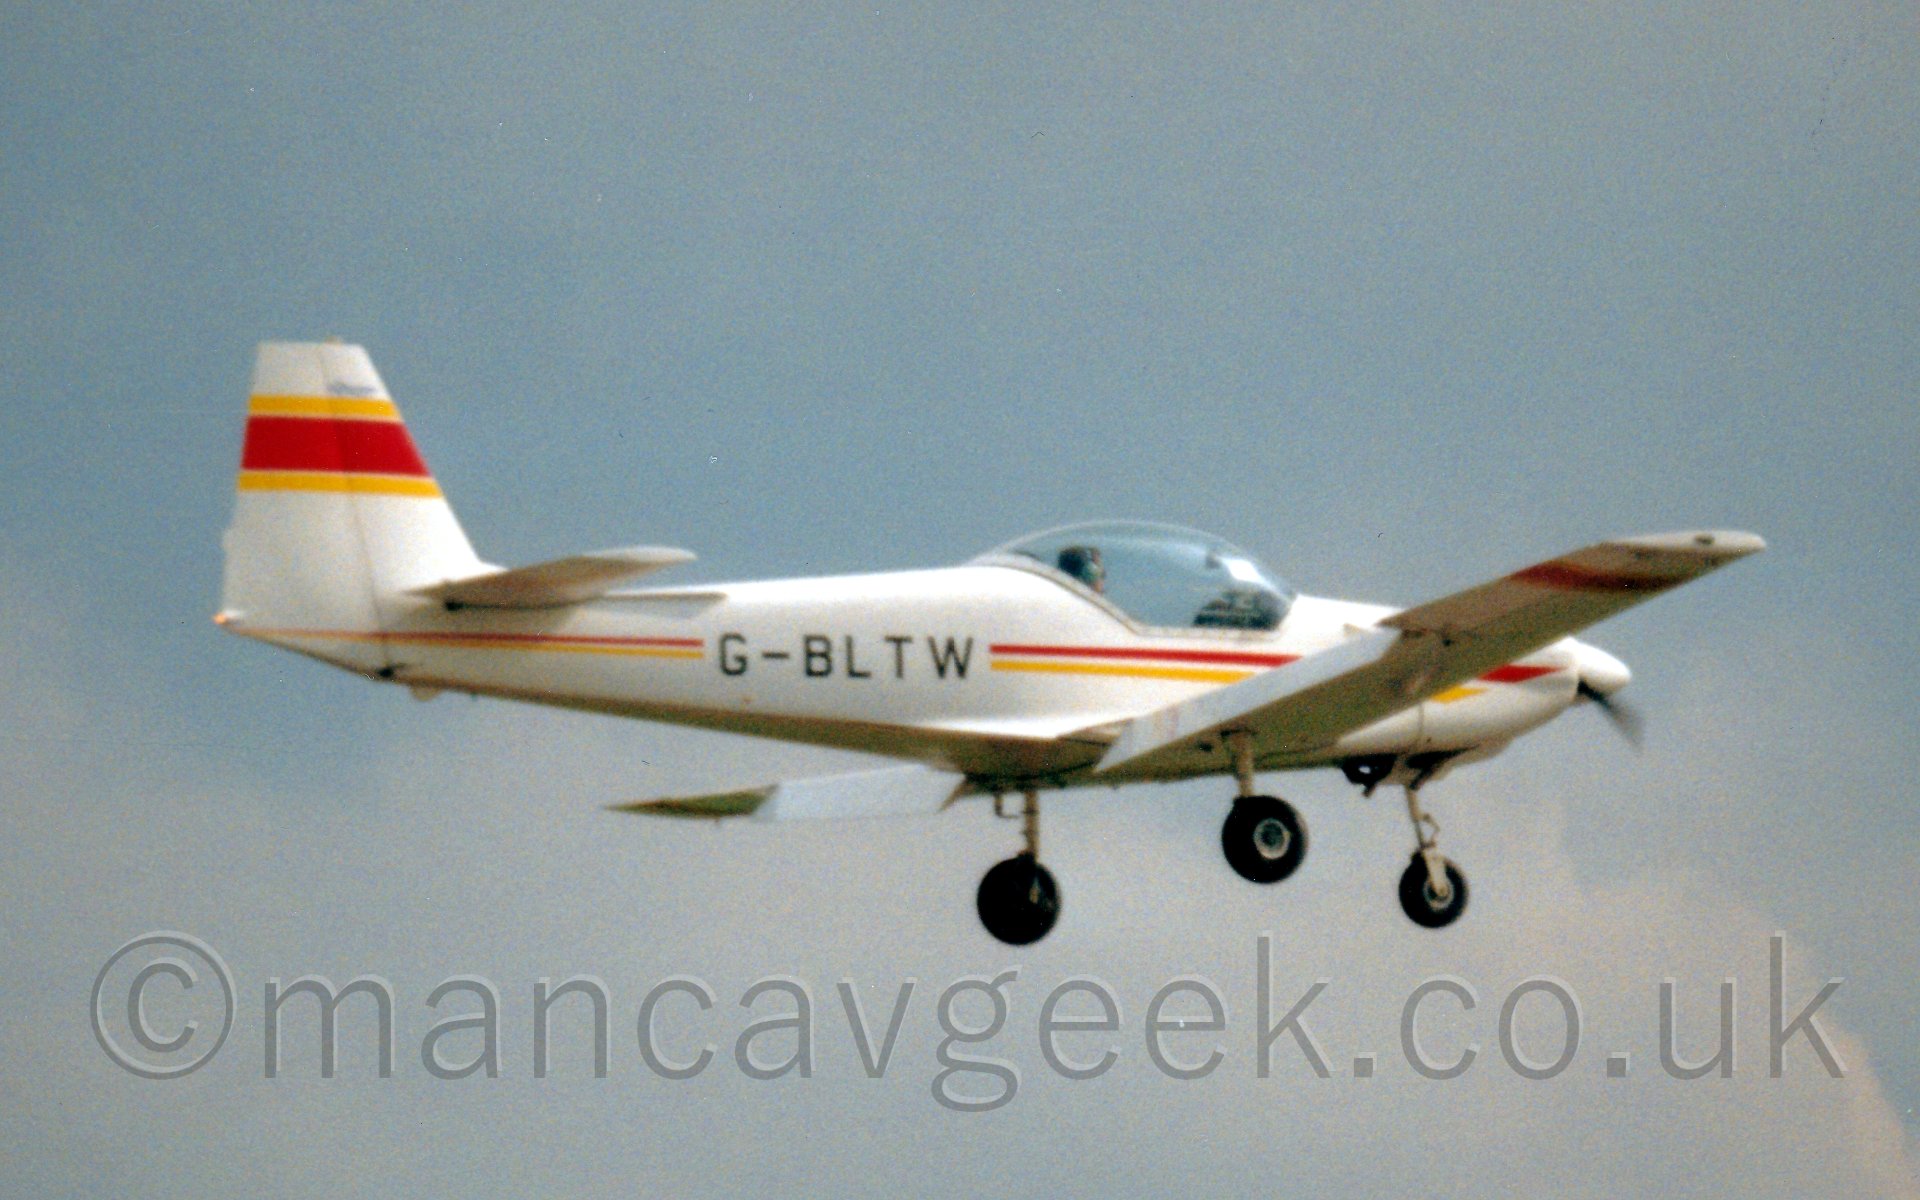 Side view of a single engined light aircraft flying from left to right at a low altitude. The plane is mostly white, with a red and yellow cheatline running along the body, with the registration "G-BLTW" overlaid in black on the rear fuselage. The tail is white, with a yellow-red-yellow stripe running from front to back. The planes cockpit has a large bubble canopy, with the sun reflecting strongly off the front. In the background, grey cloud fills the frame, with hints of blue peeking through.